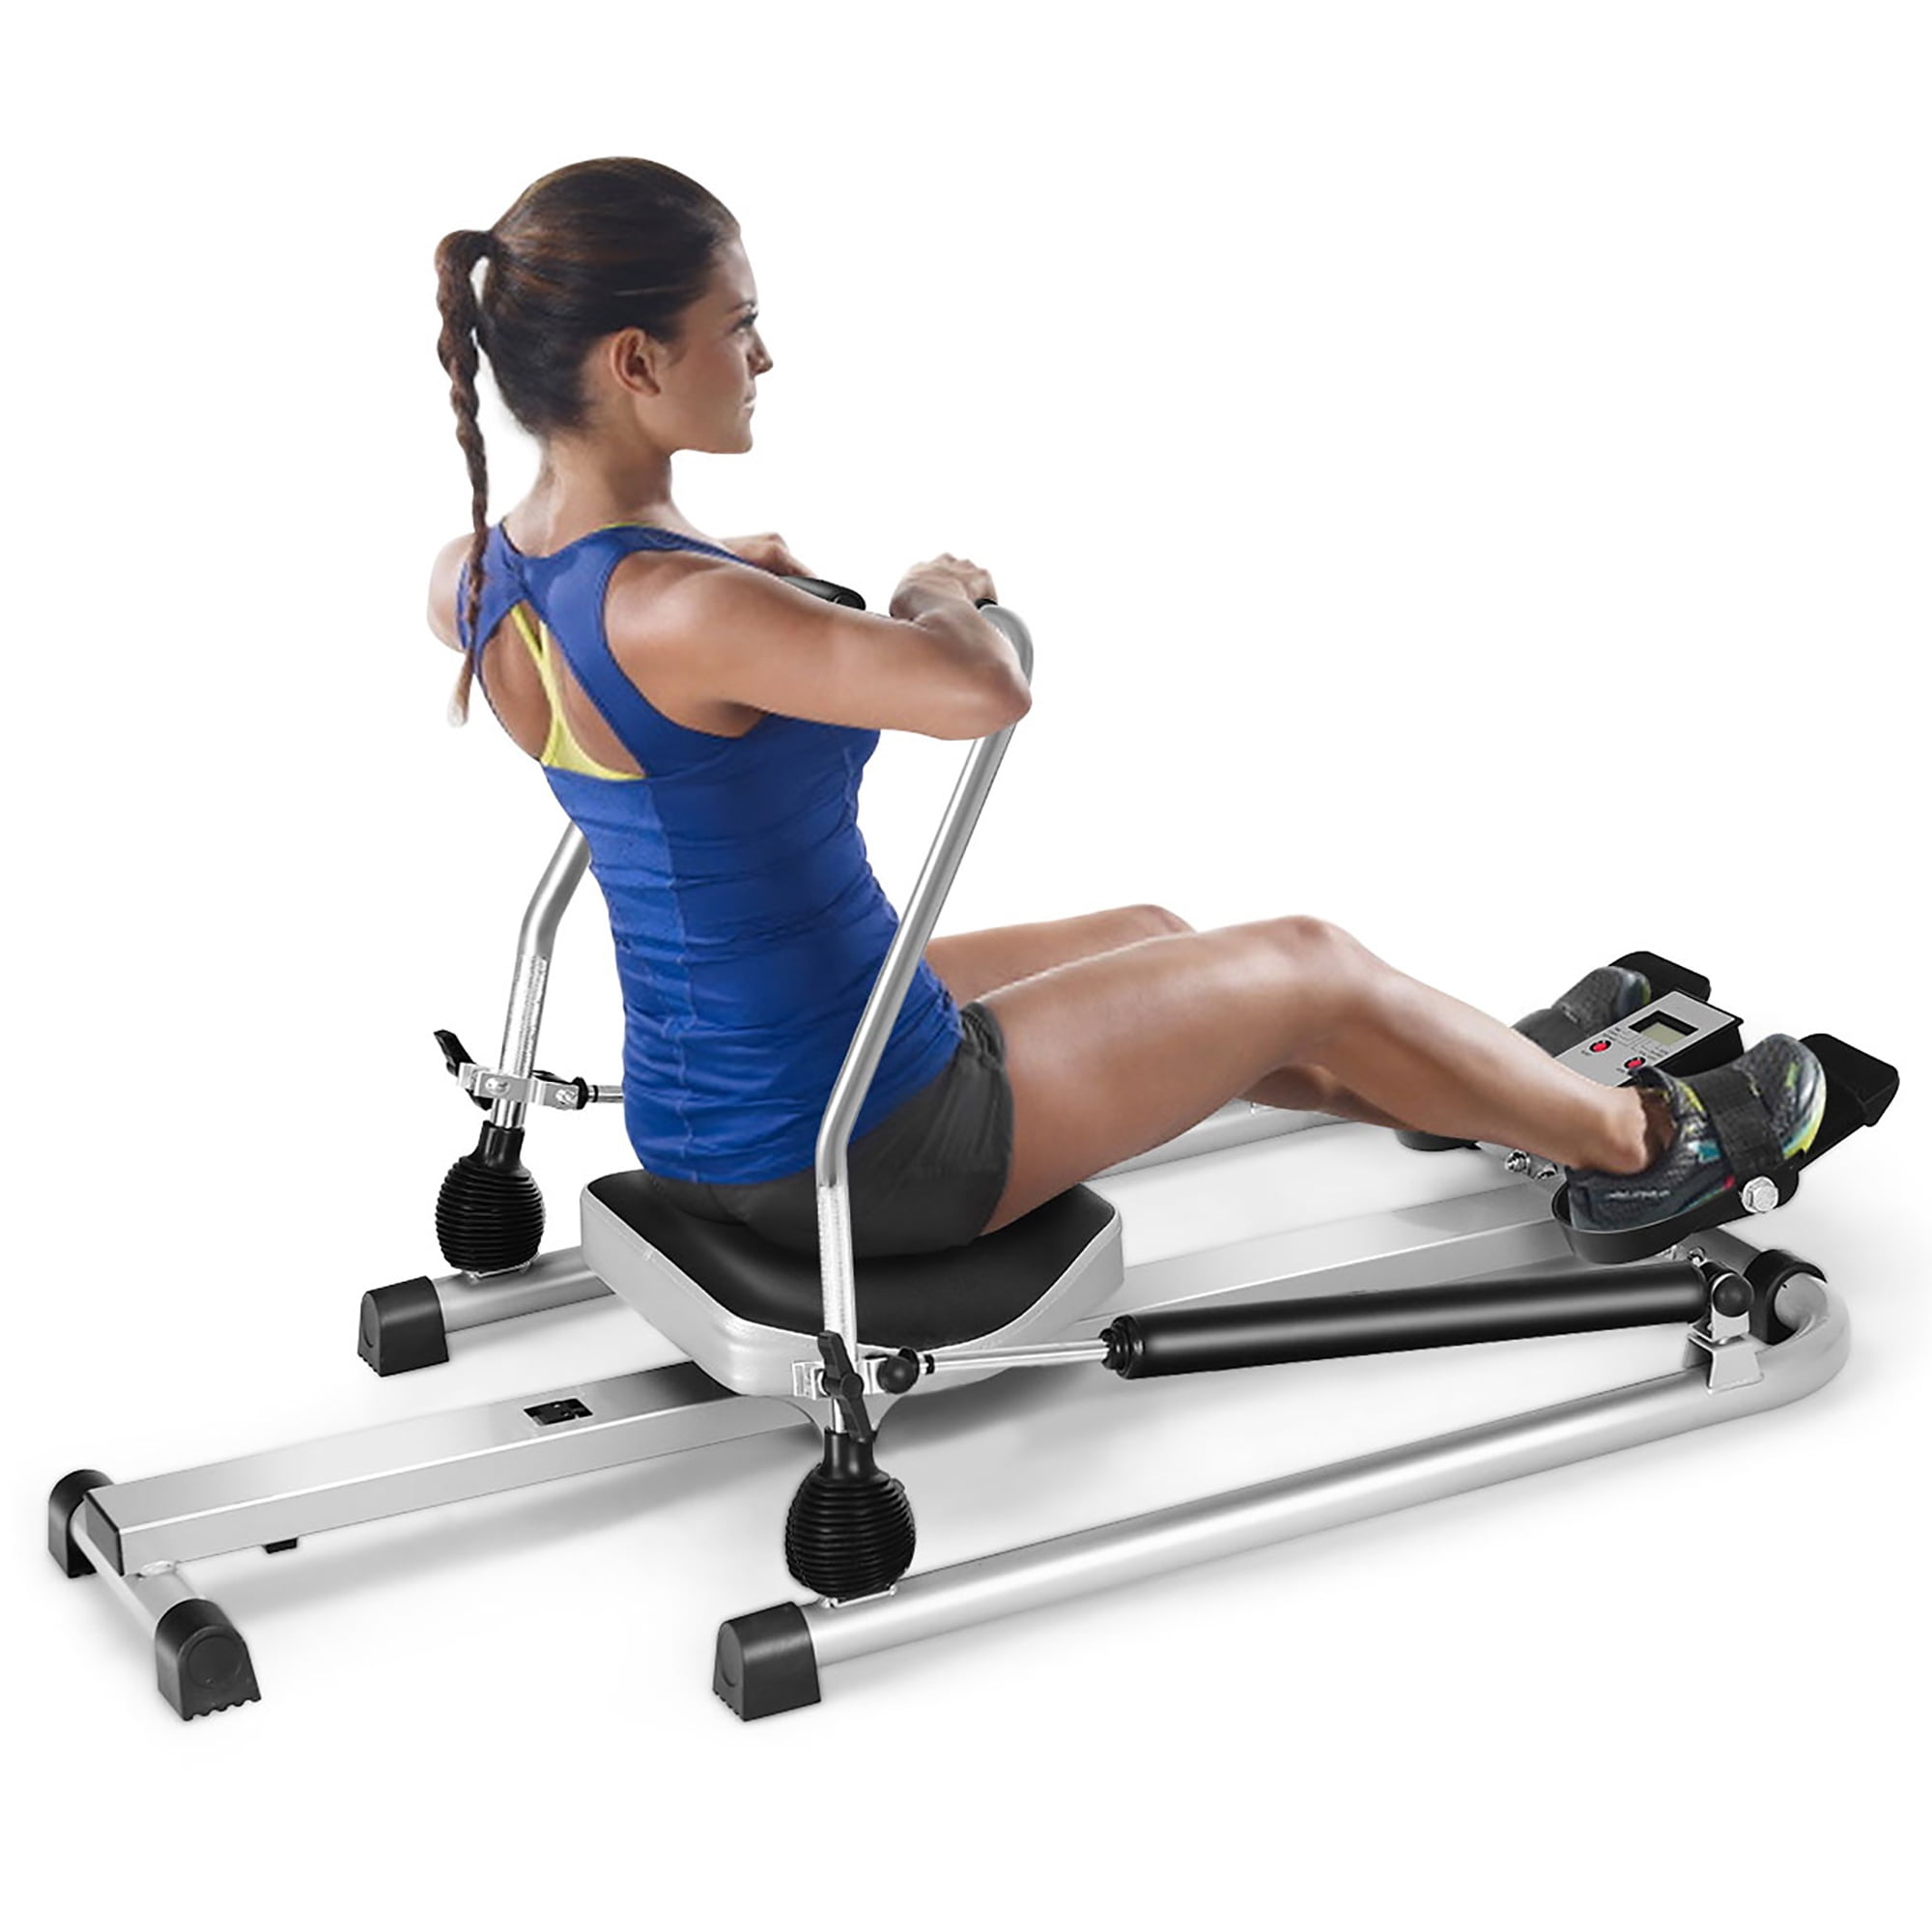 Details about   Hydraulic Rowing Machine Full Motion Adjustable Rower with 12 Level Resistance